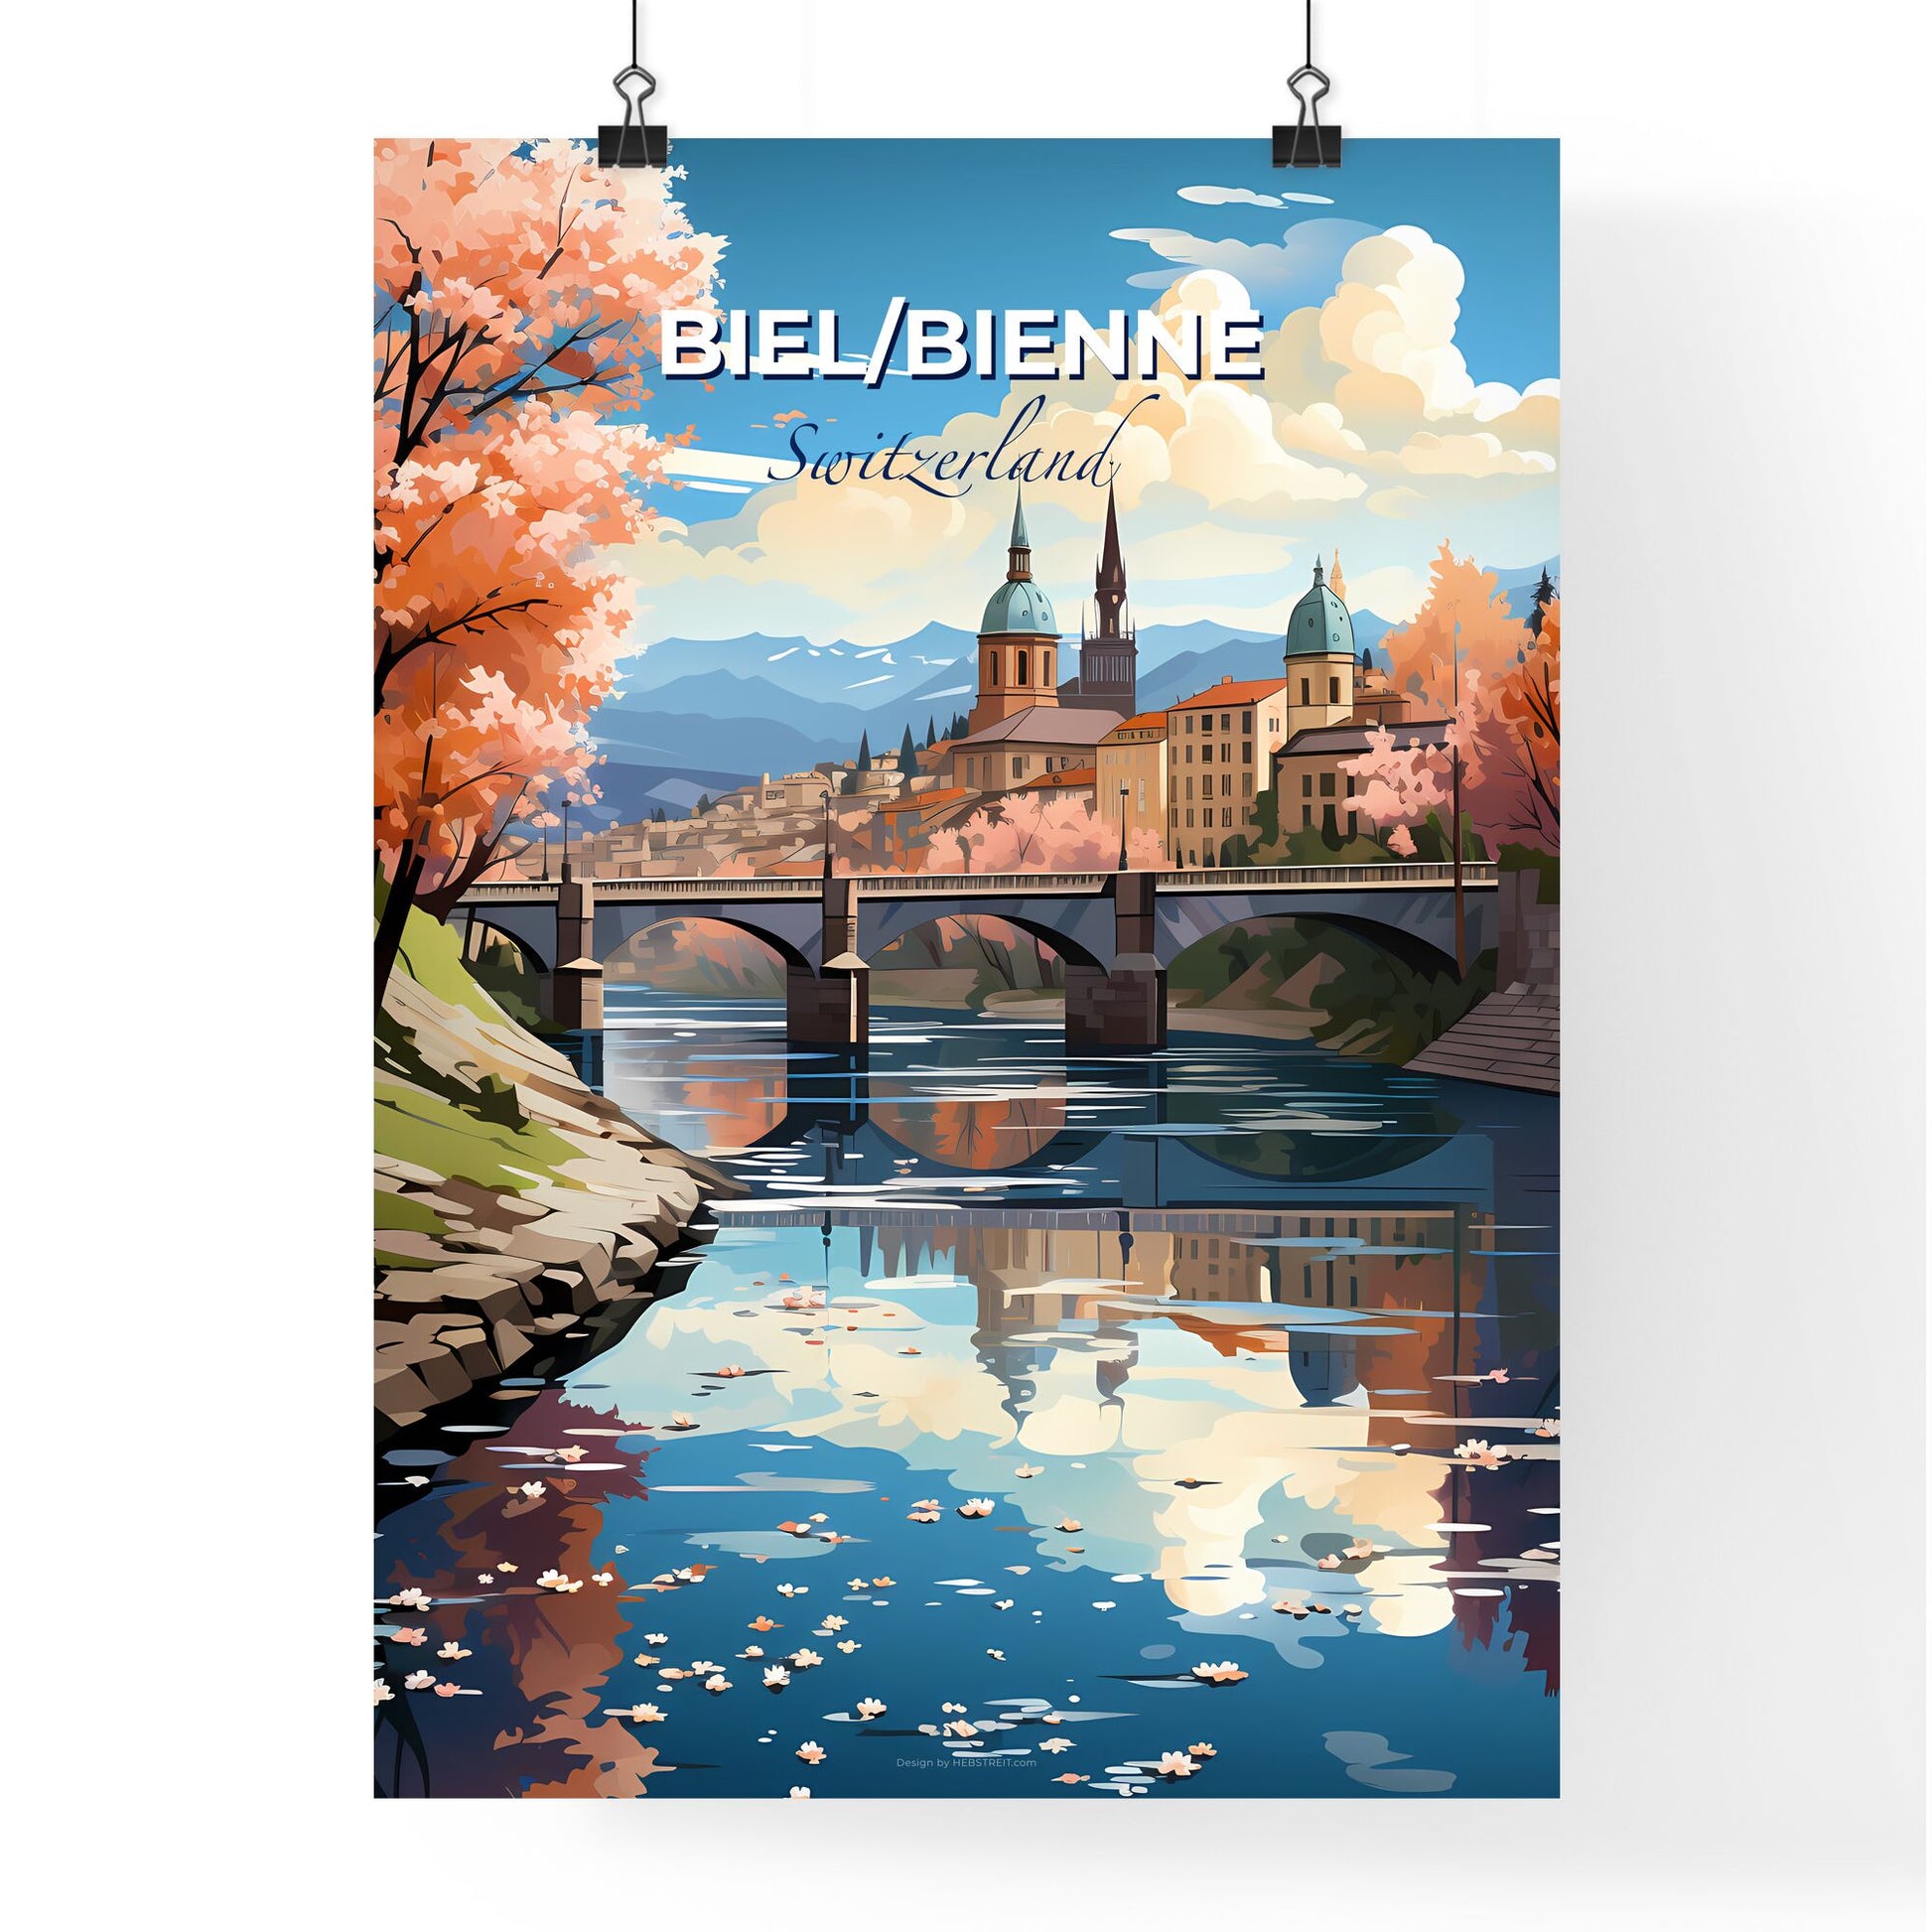 Biel/Bienne, Switzerland, A Poster of a bridge over a river with trees and buildings Default Title